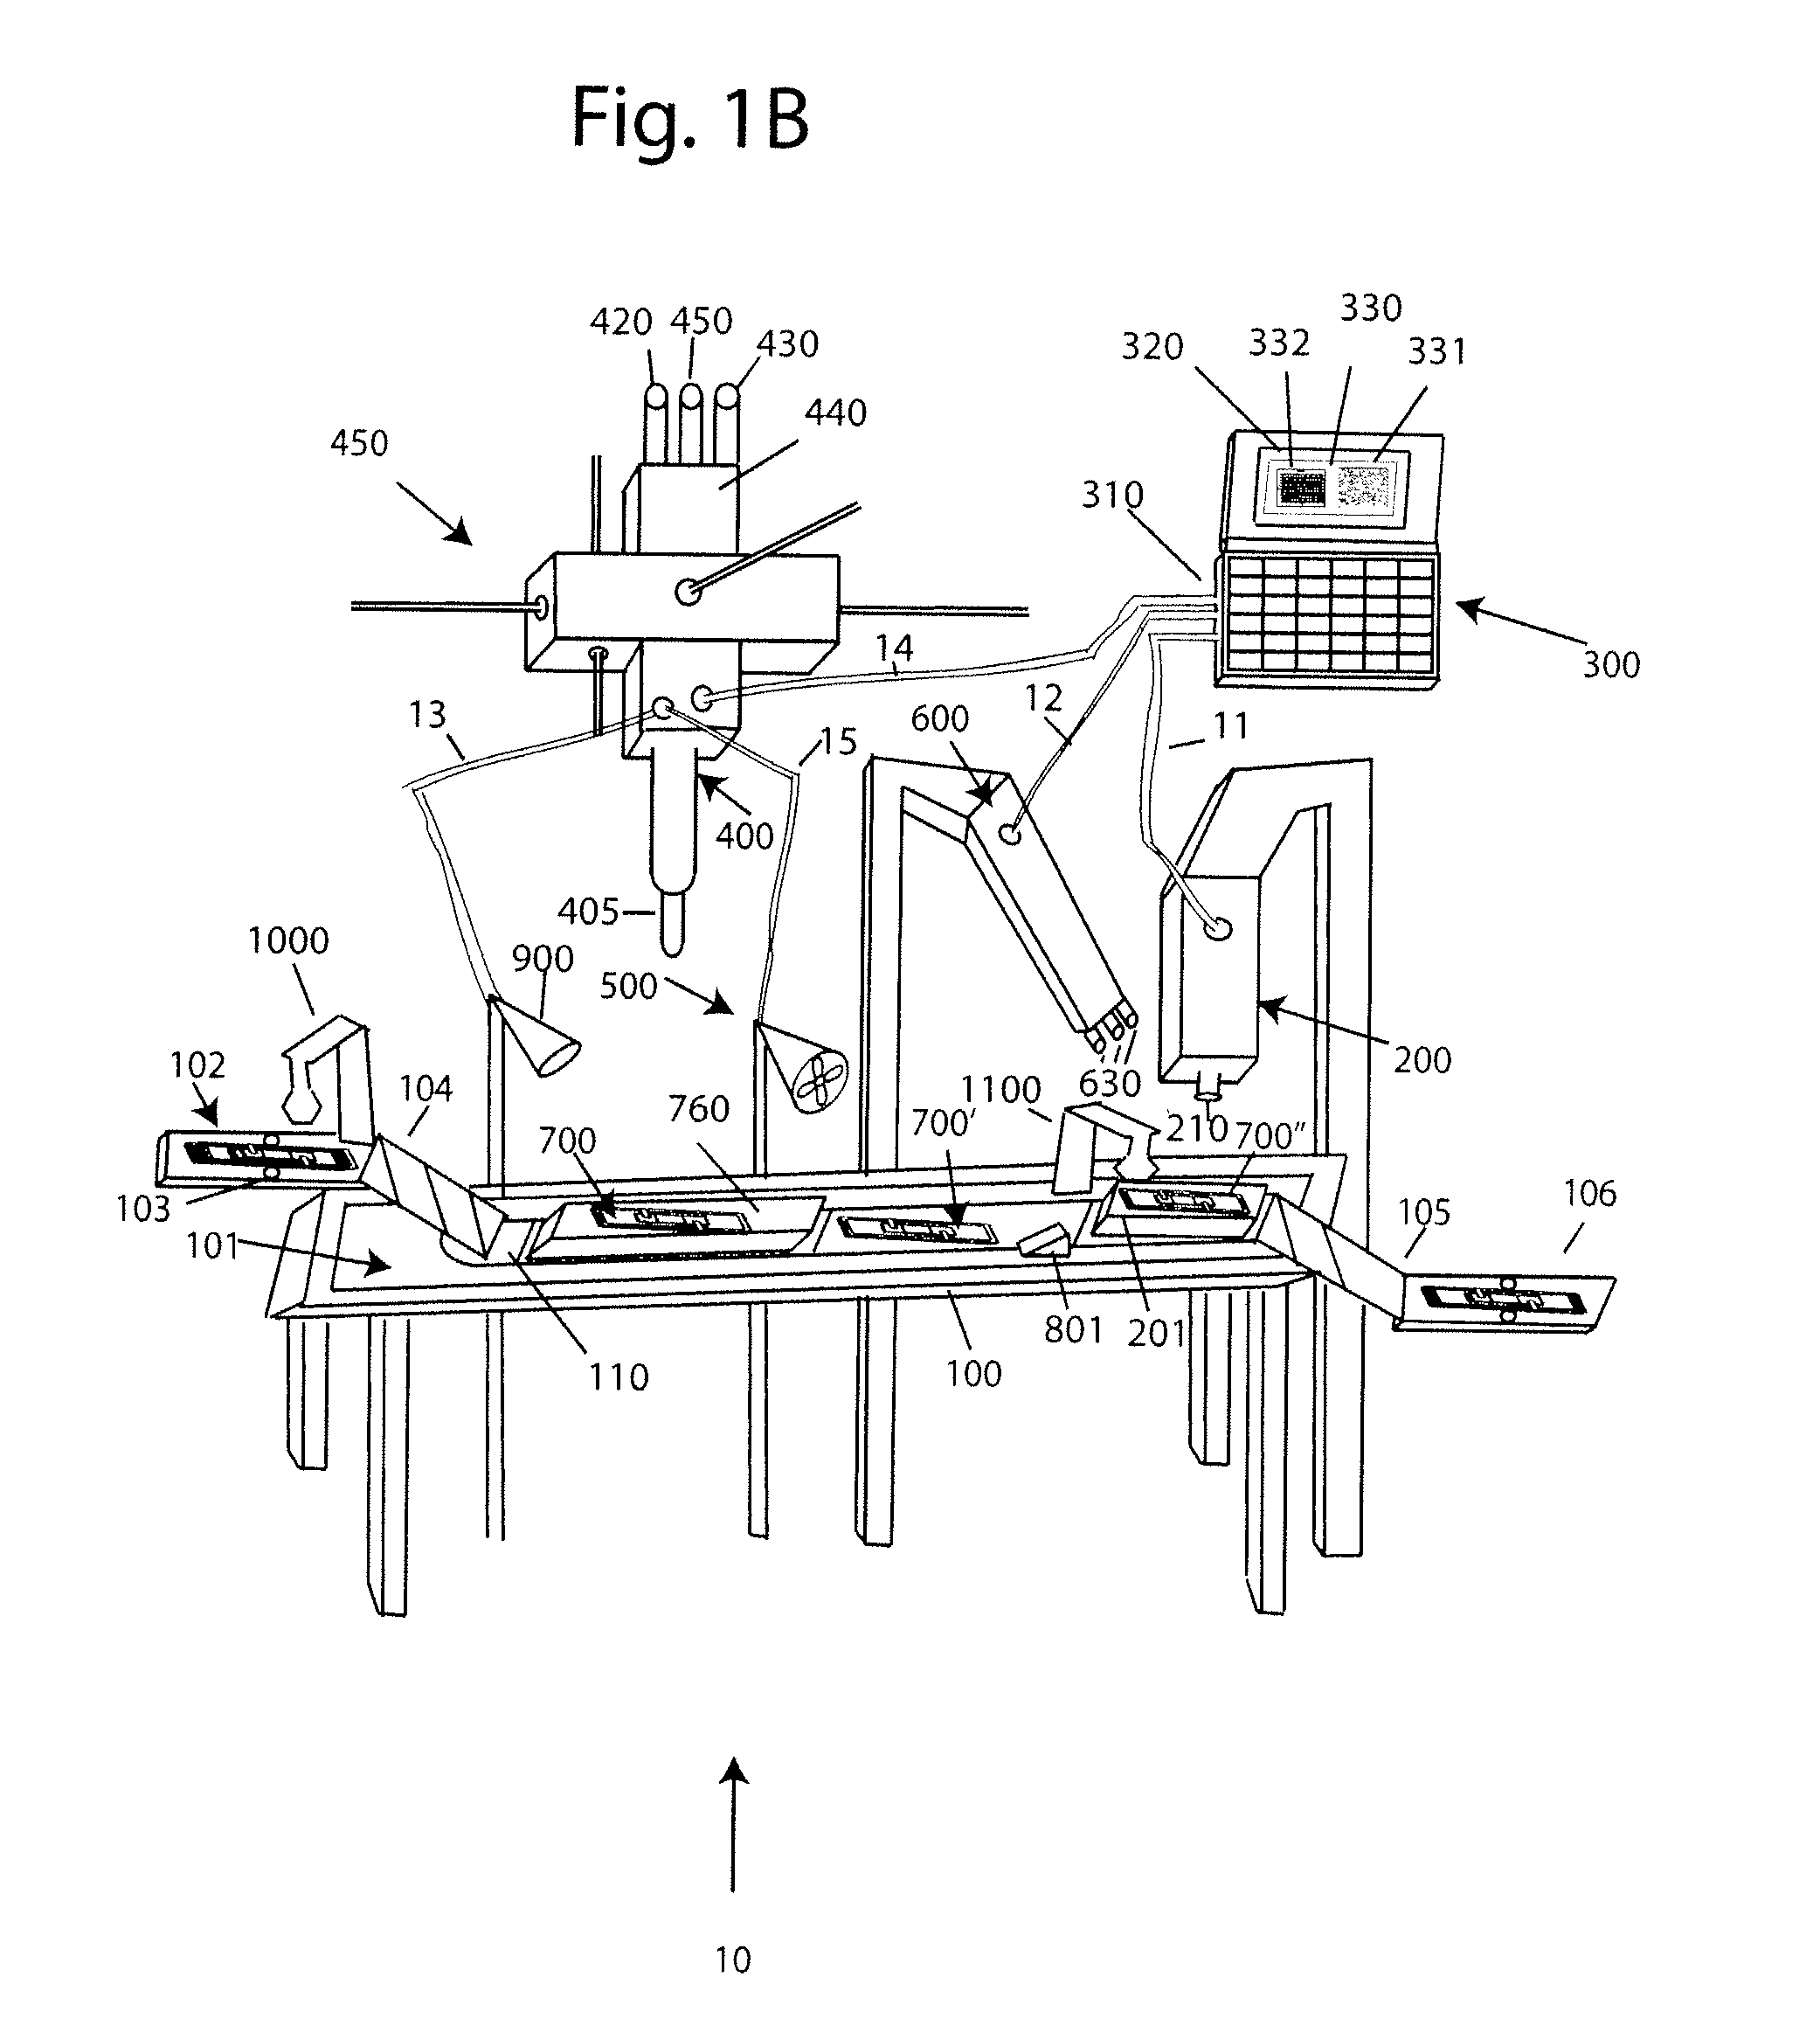 Systems and Methods for Analyzing Body Fluids